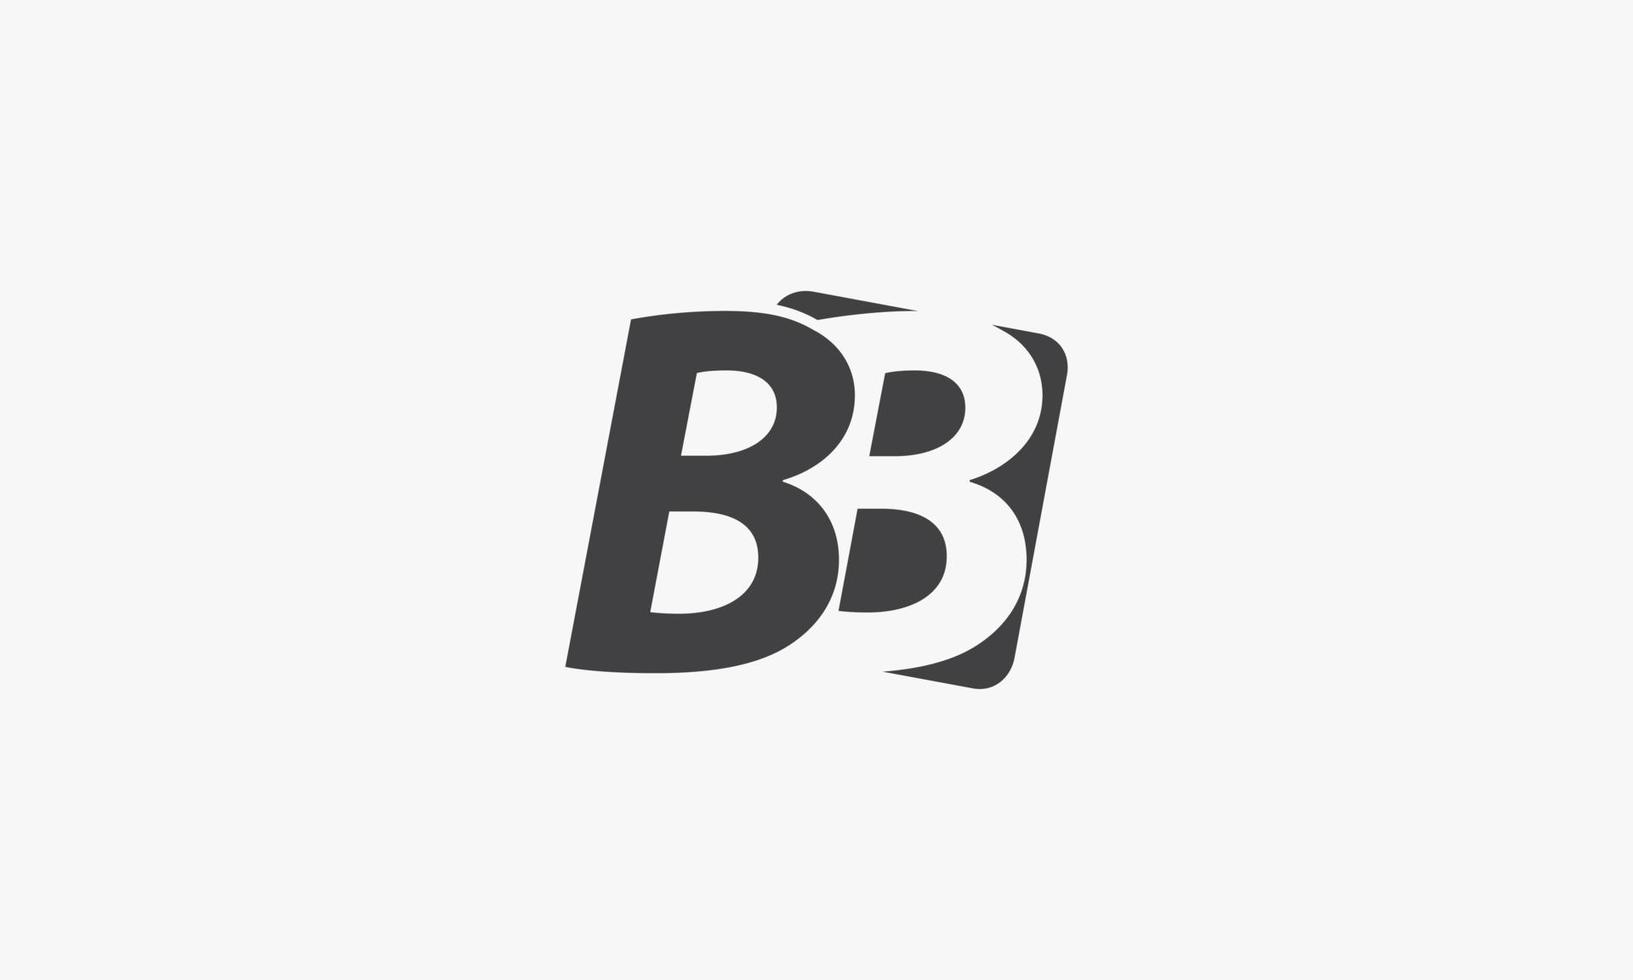 B or BB logo design vector. isolated on white background. vector